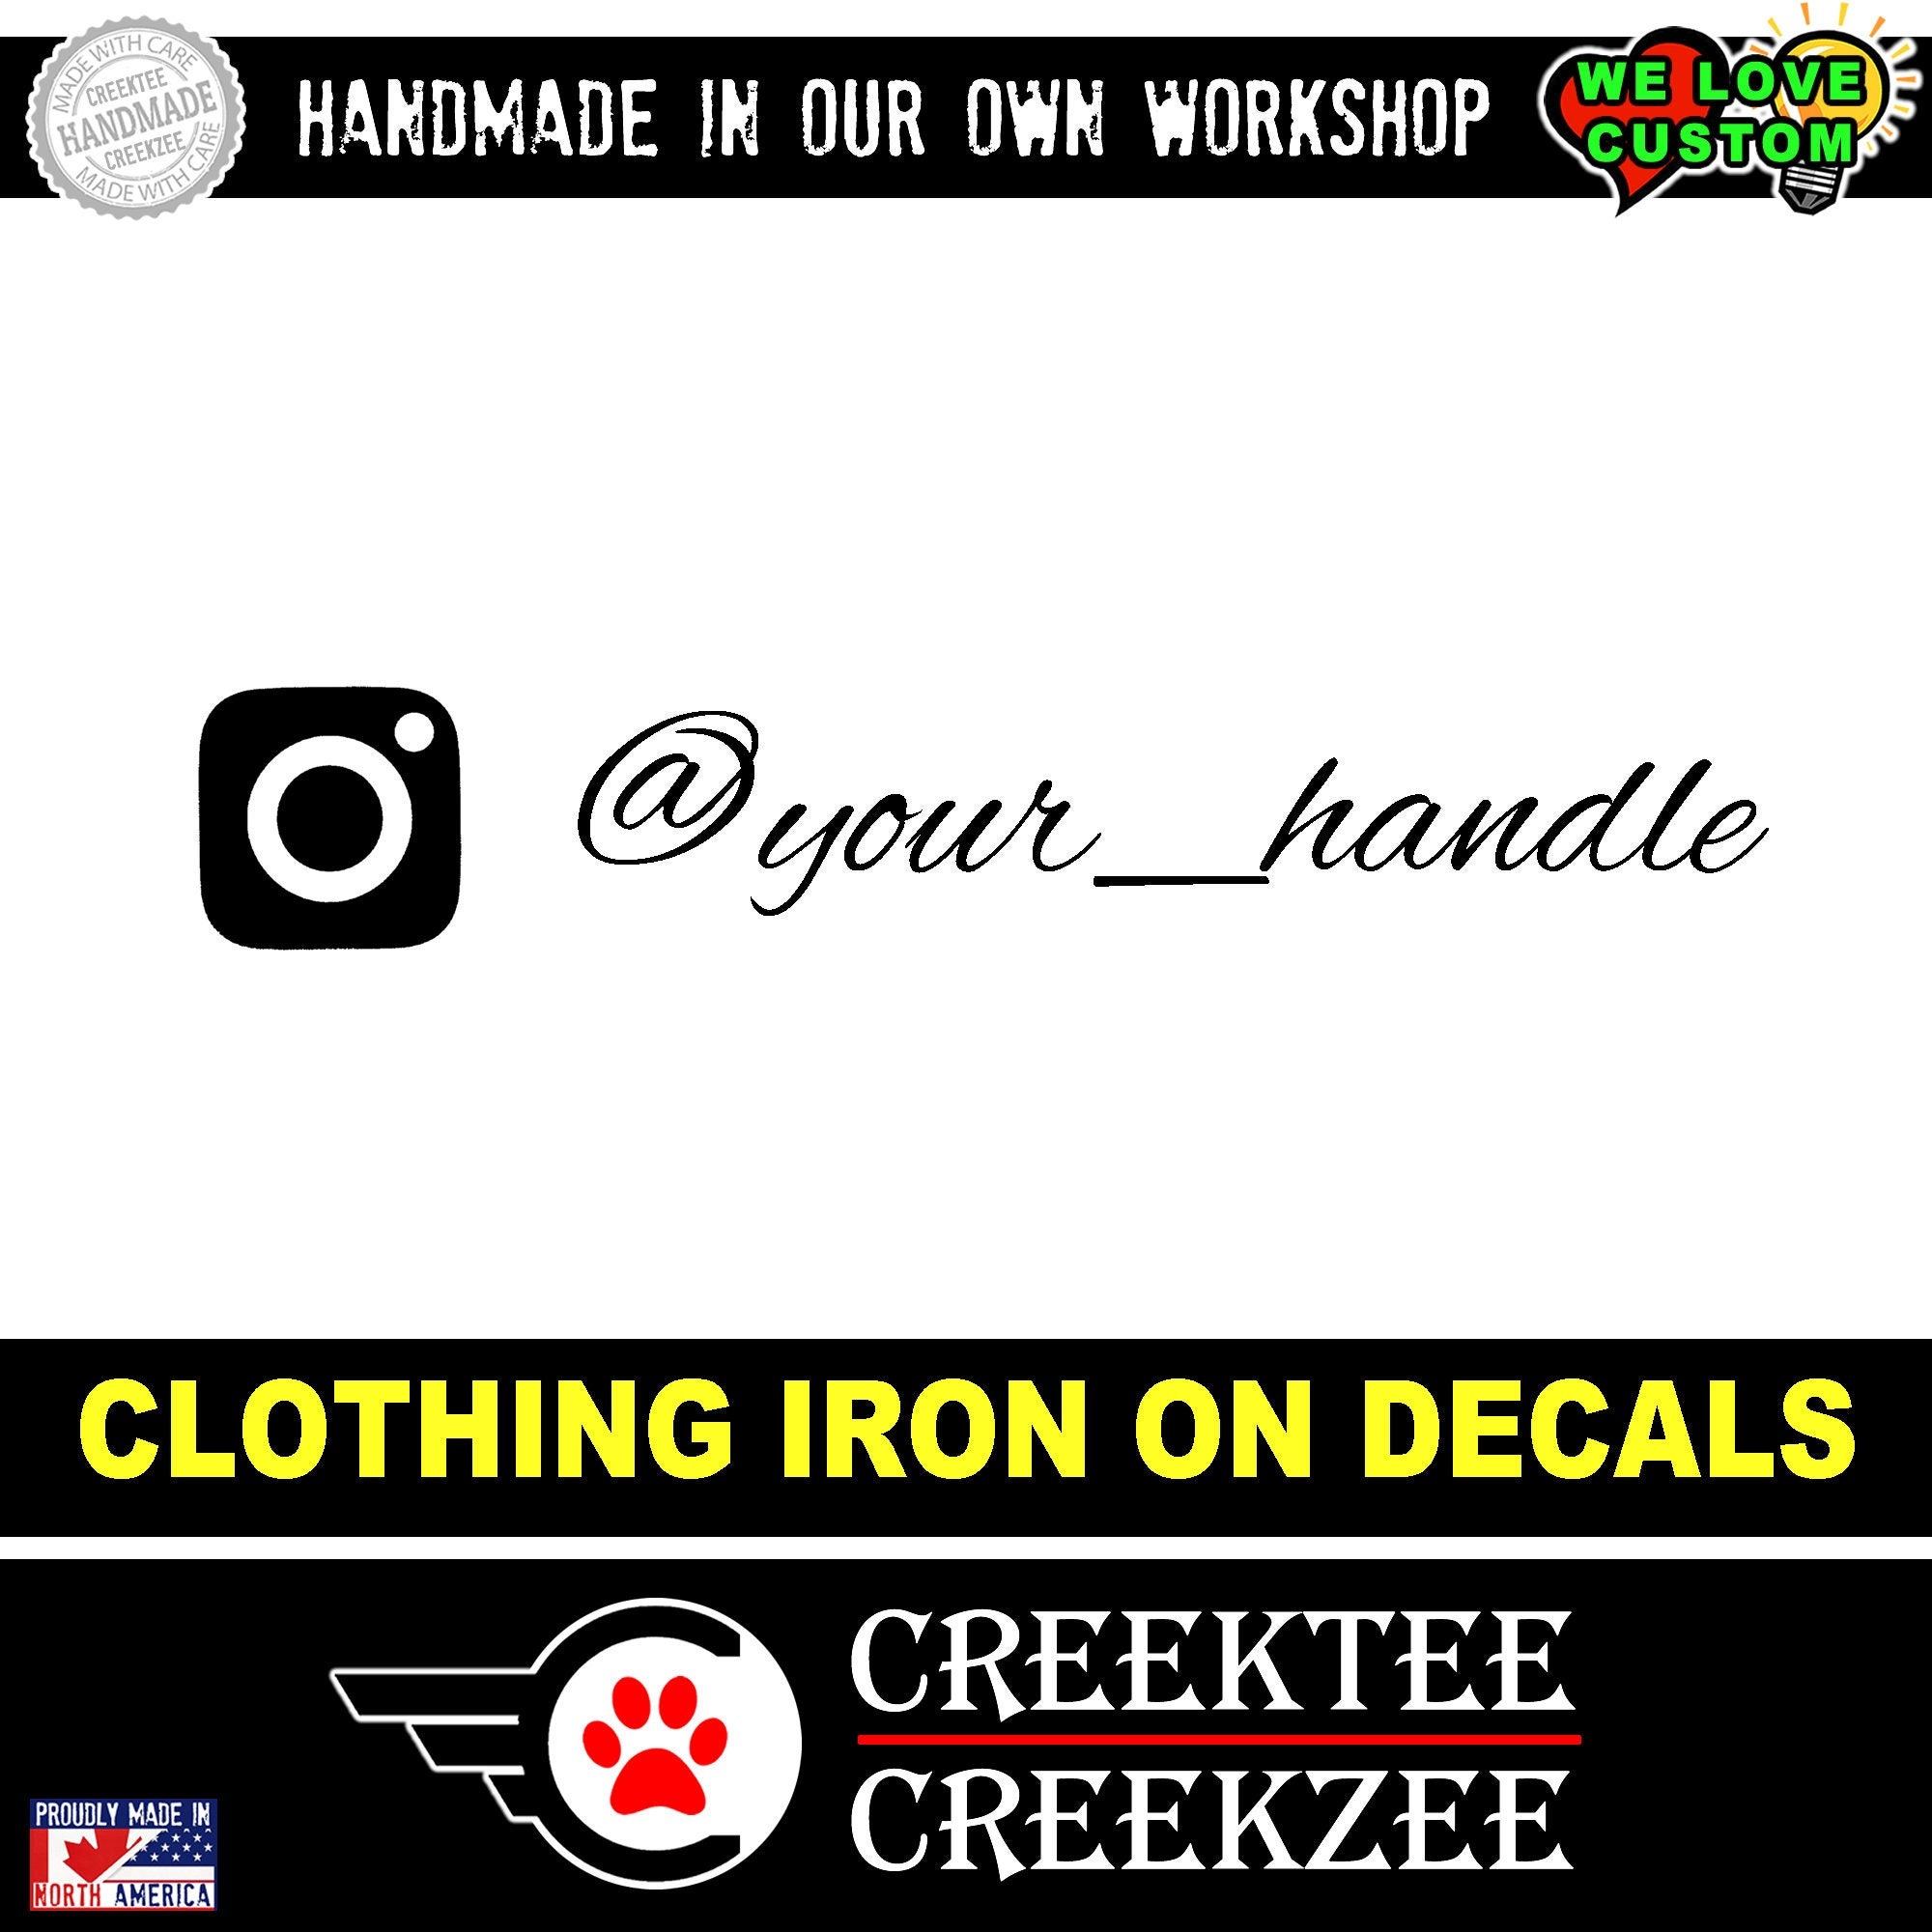 Instagram with custom text Iron On DIY Vinyl Decal - various sizes and colors - colours